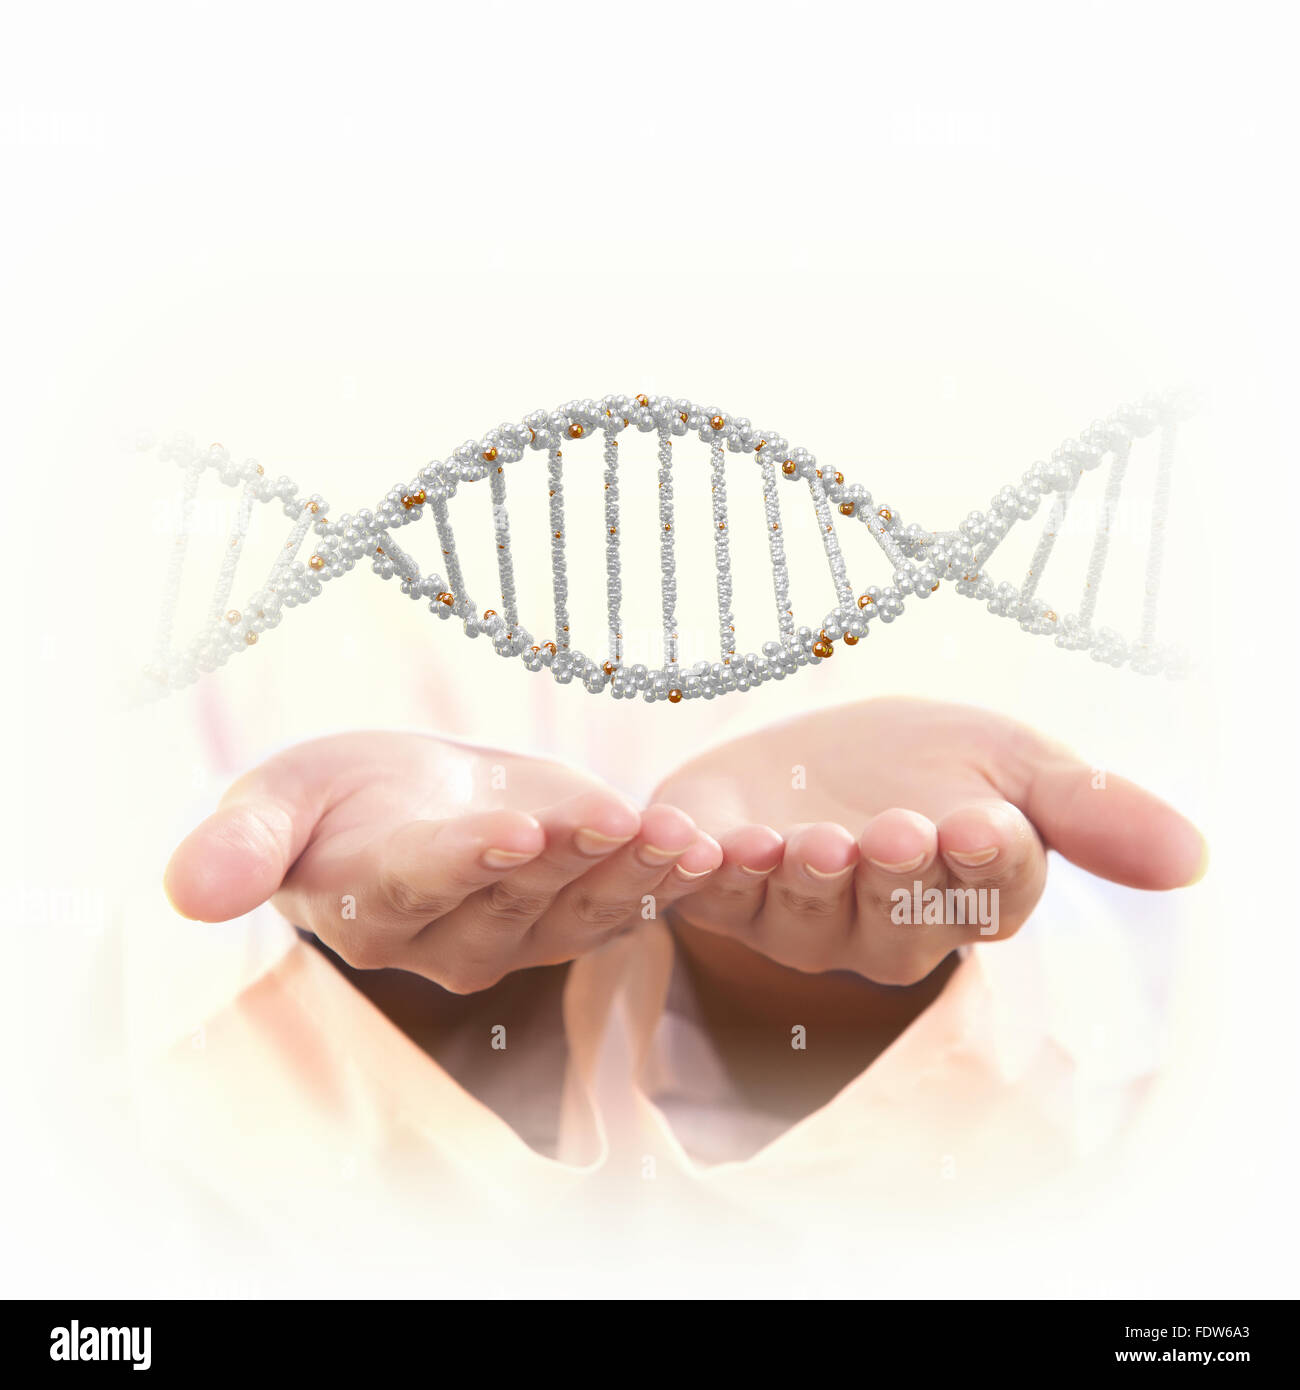 Image of DNA strand against background with human hands Stock Photo